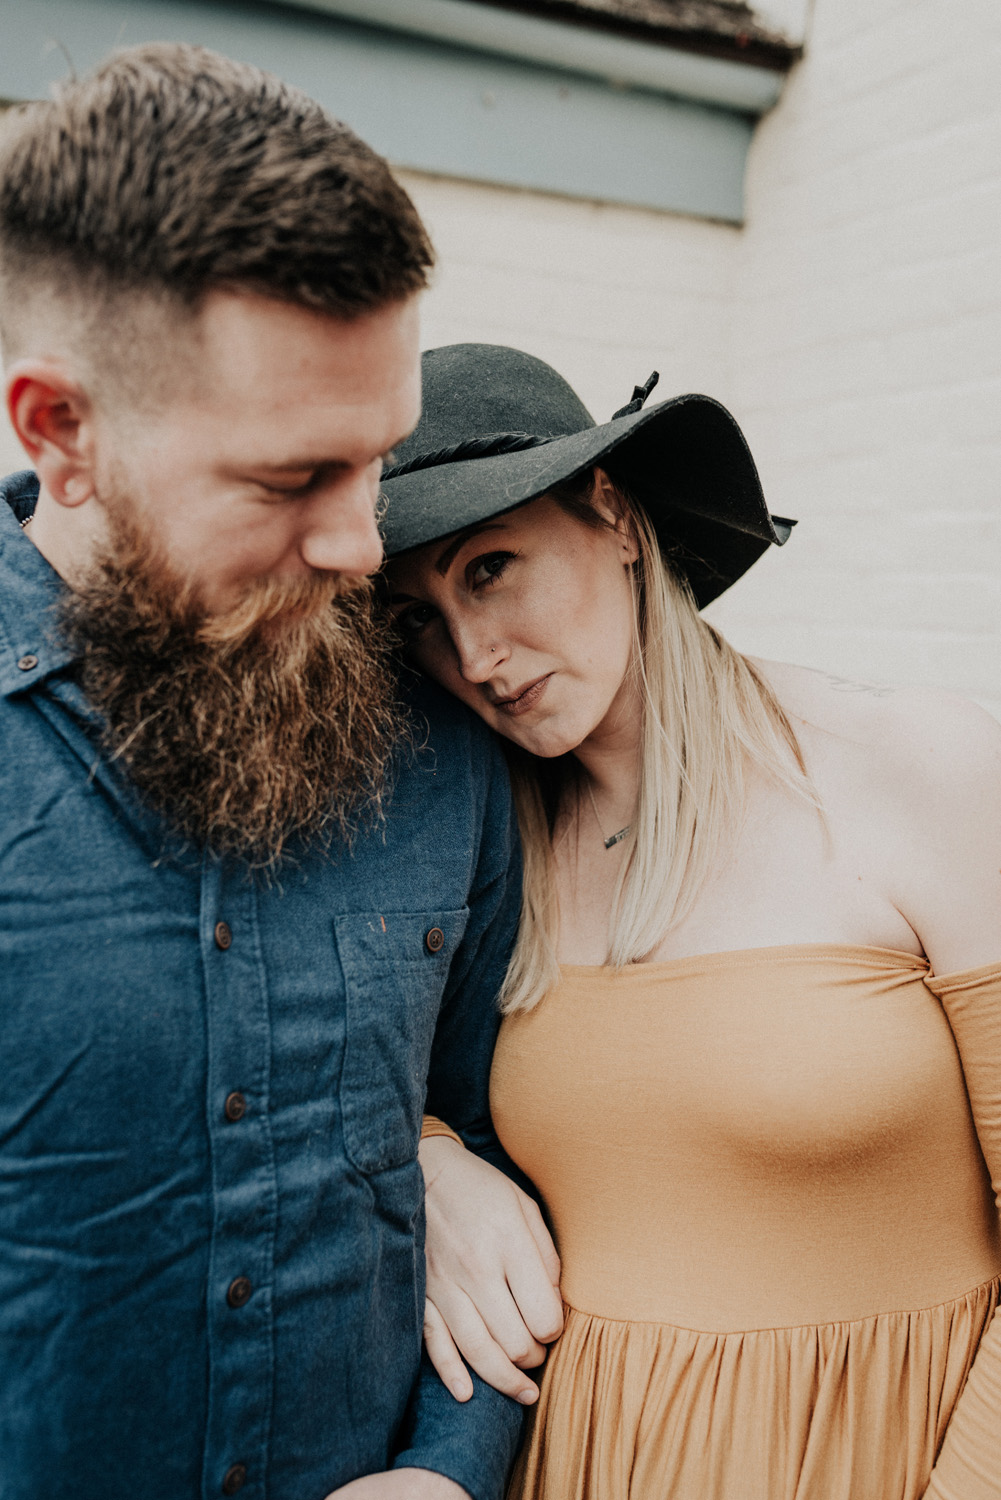 KyleWillisPhoto-Kyle-Willis-Photography-Parvin-State-Park-Pittsgrove-Township-New-Jersey-Maternity-Session-Lake-Pregnant-Engagement-Hipster-Photographer-Philadelphia-Wedding